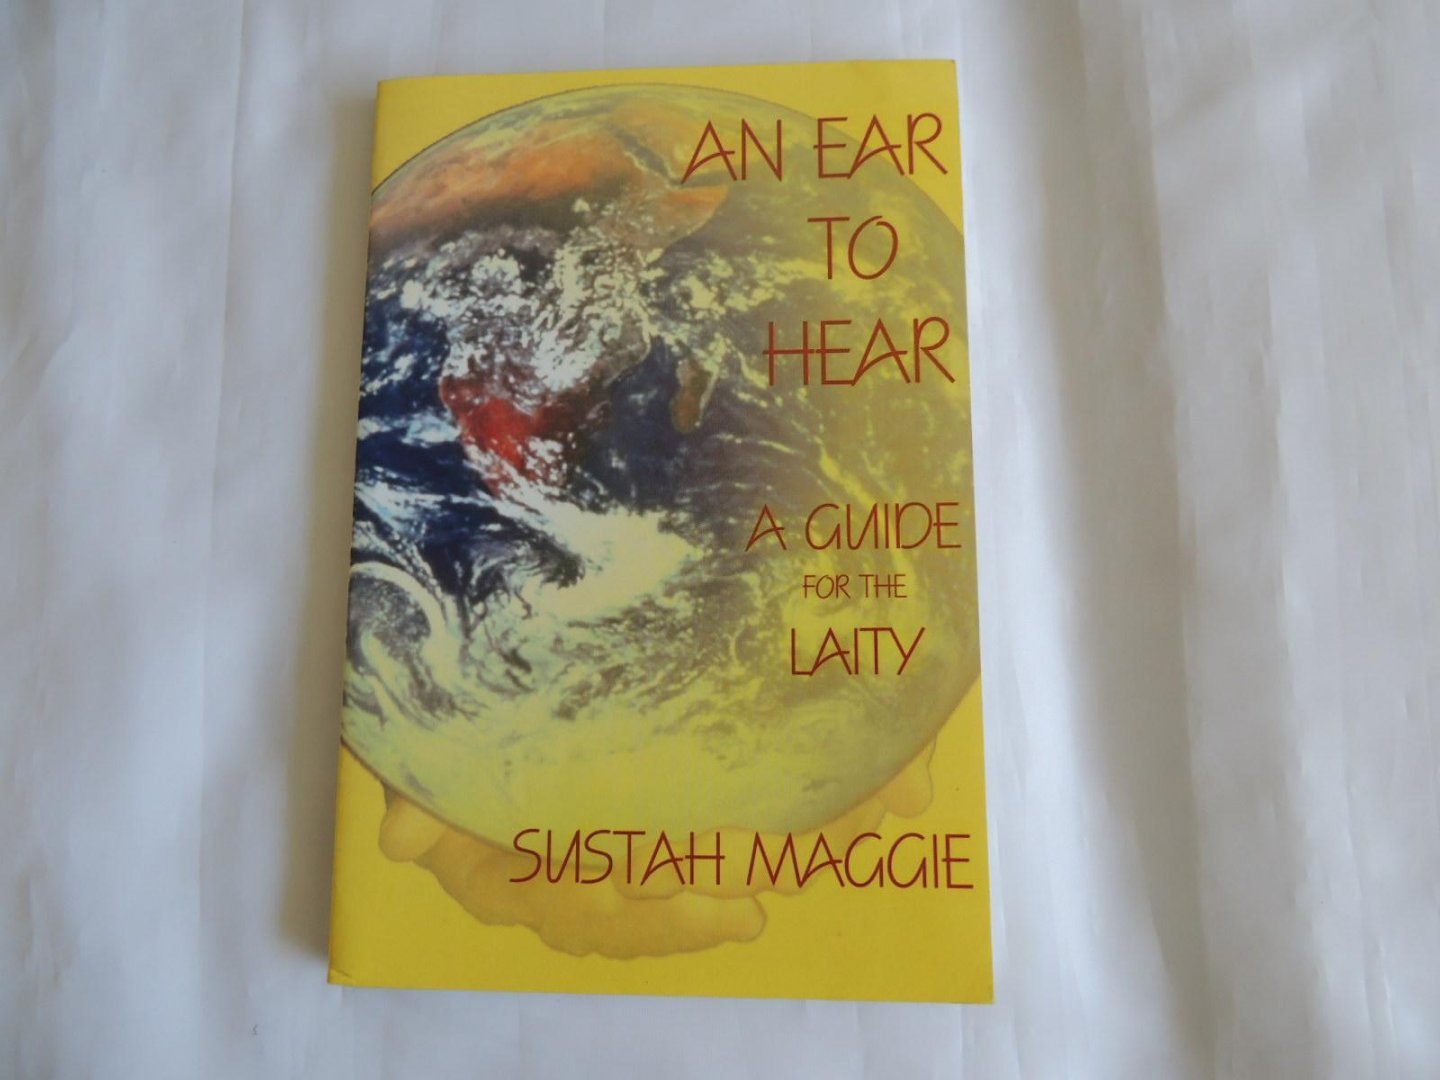 Maggie Sustah - An Ear to Hear - a guide to the laity